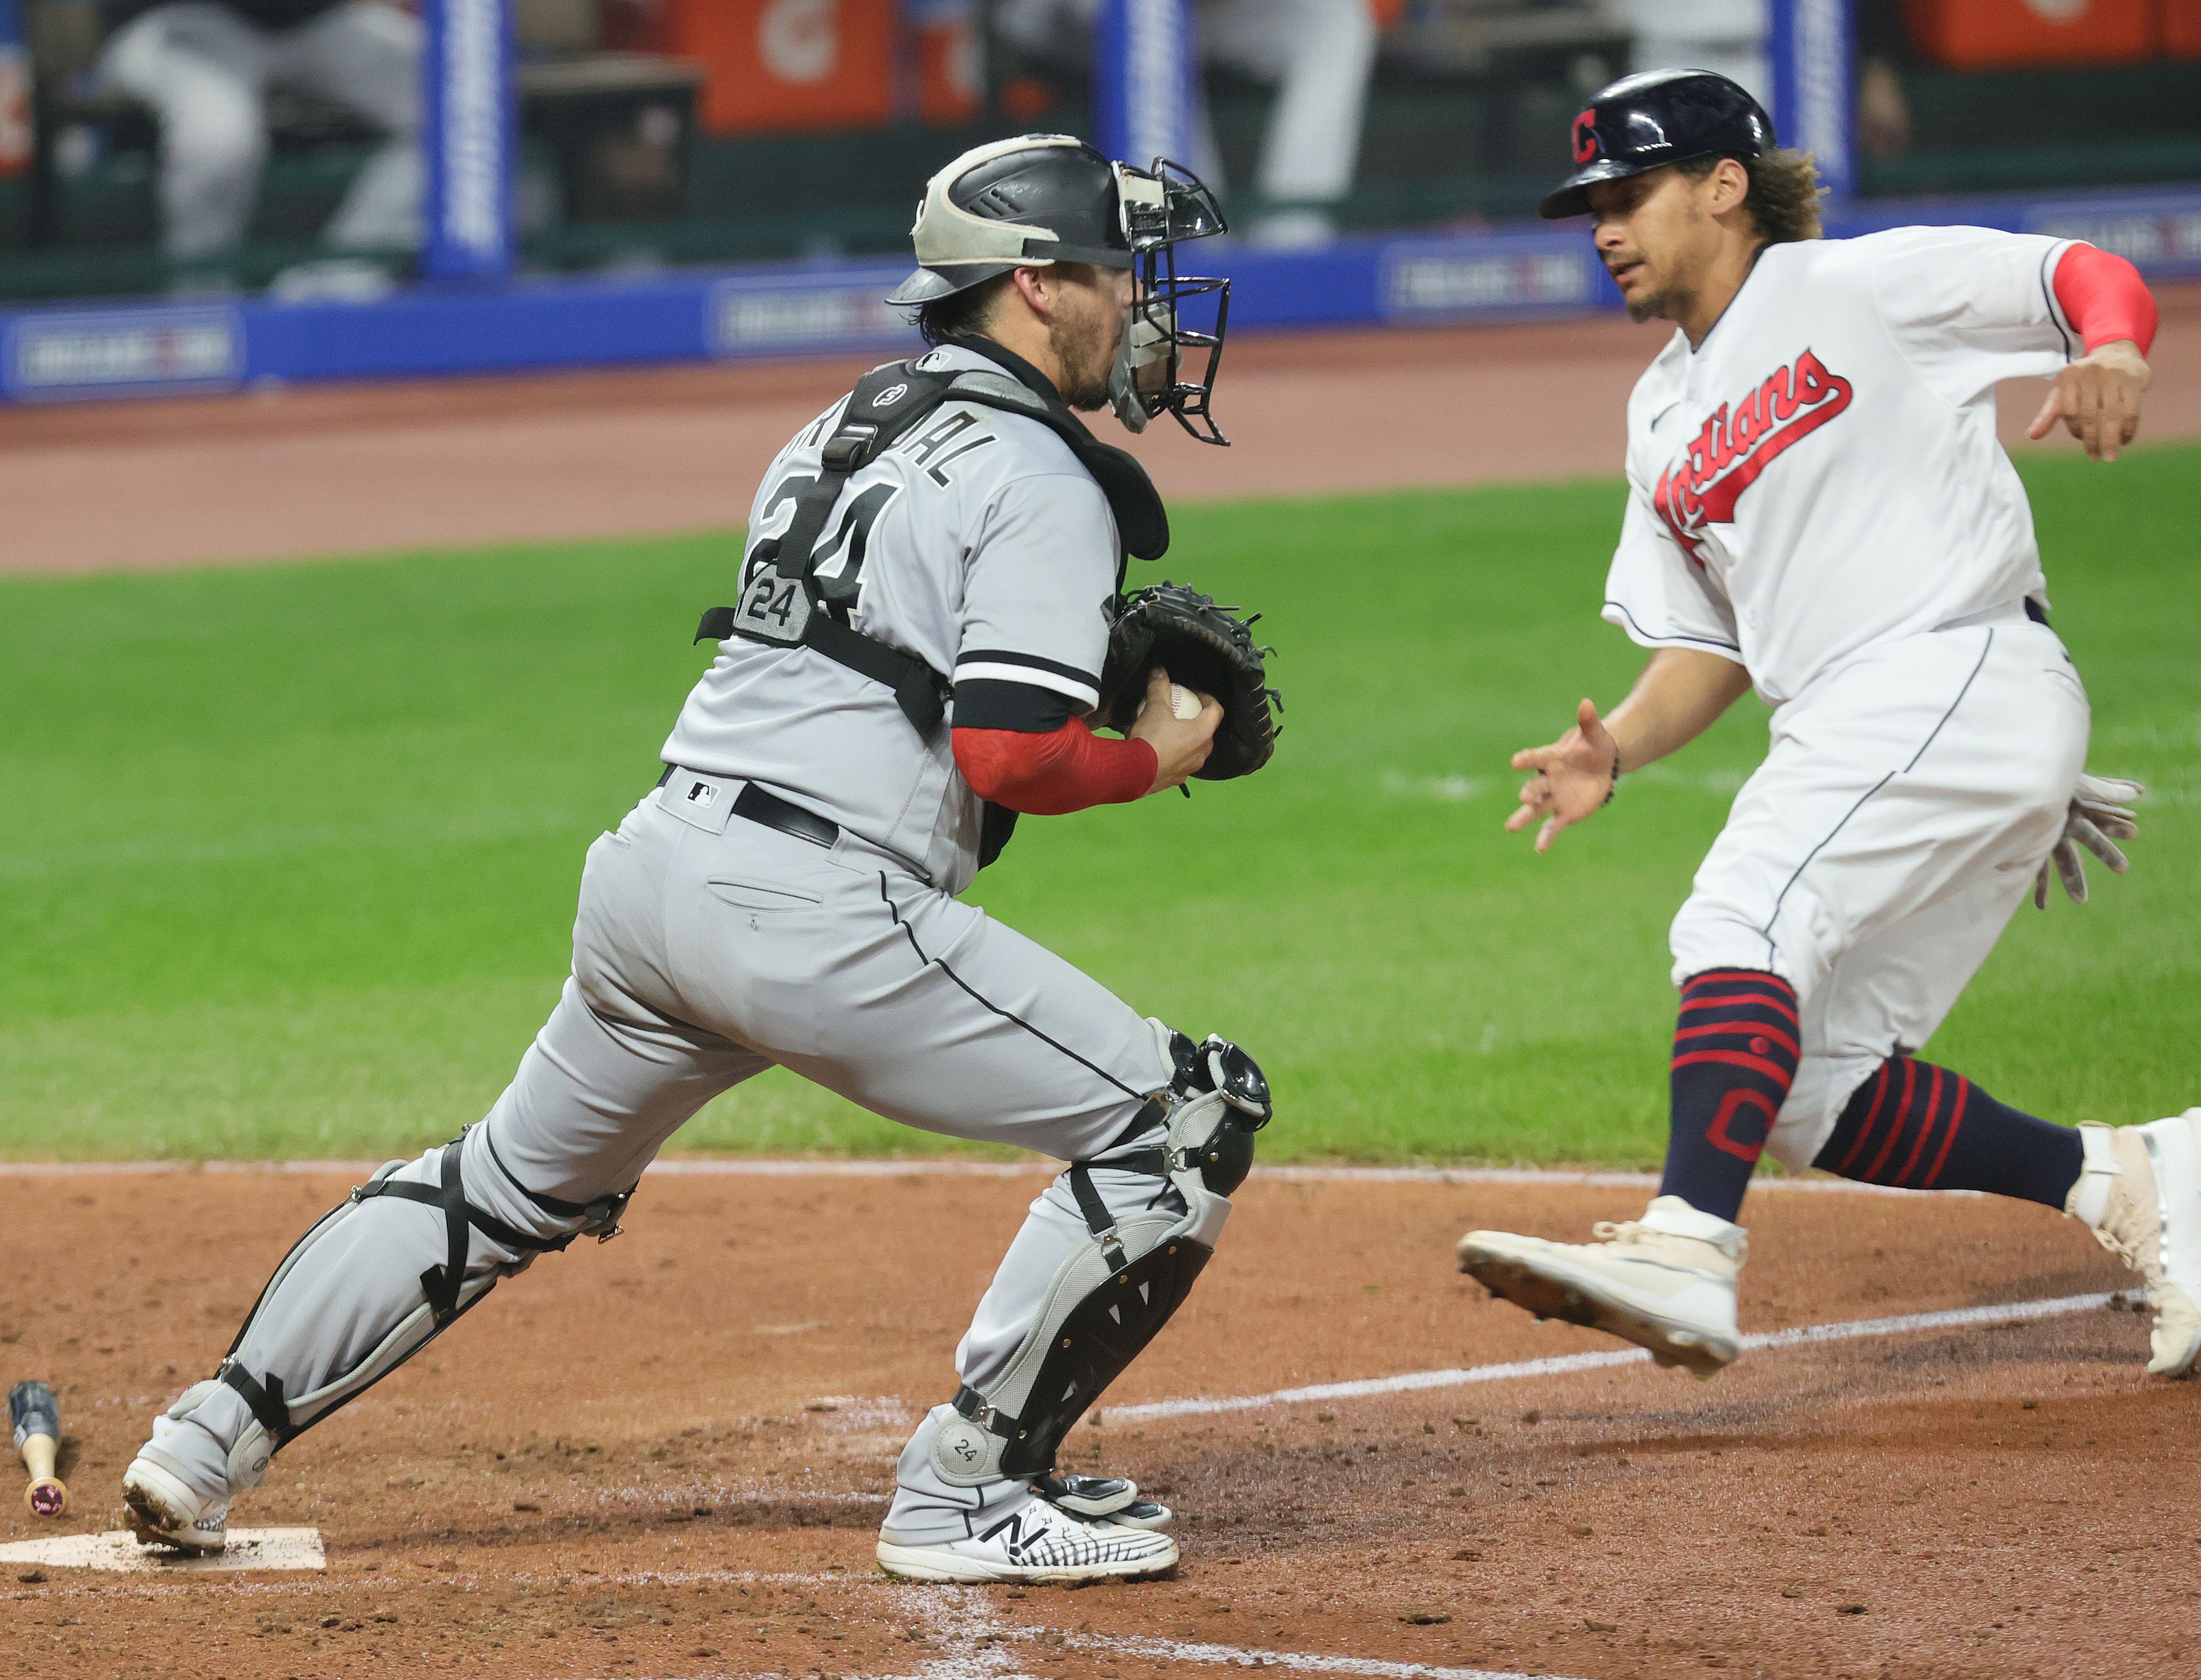 Three straight pinch-hits a first for Cleveland Indians since 10